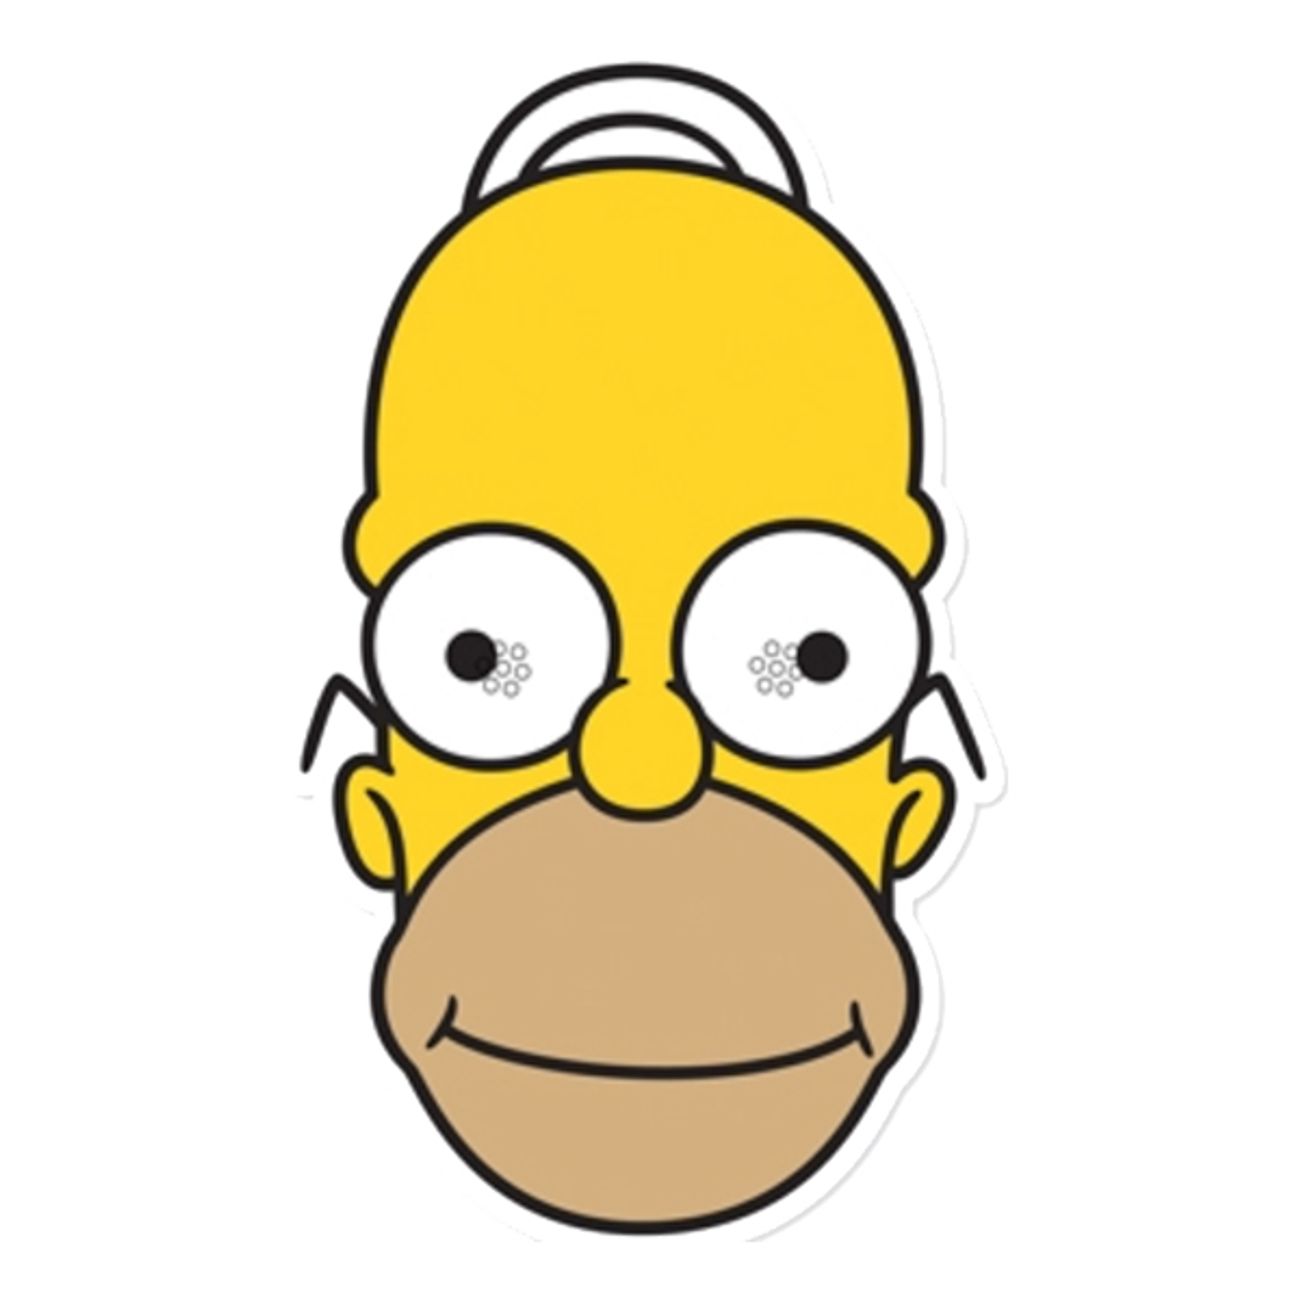 homer-simpson-pappmask-1